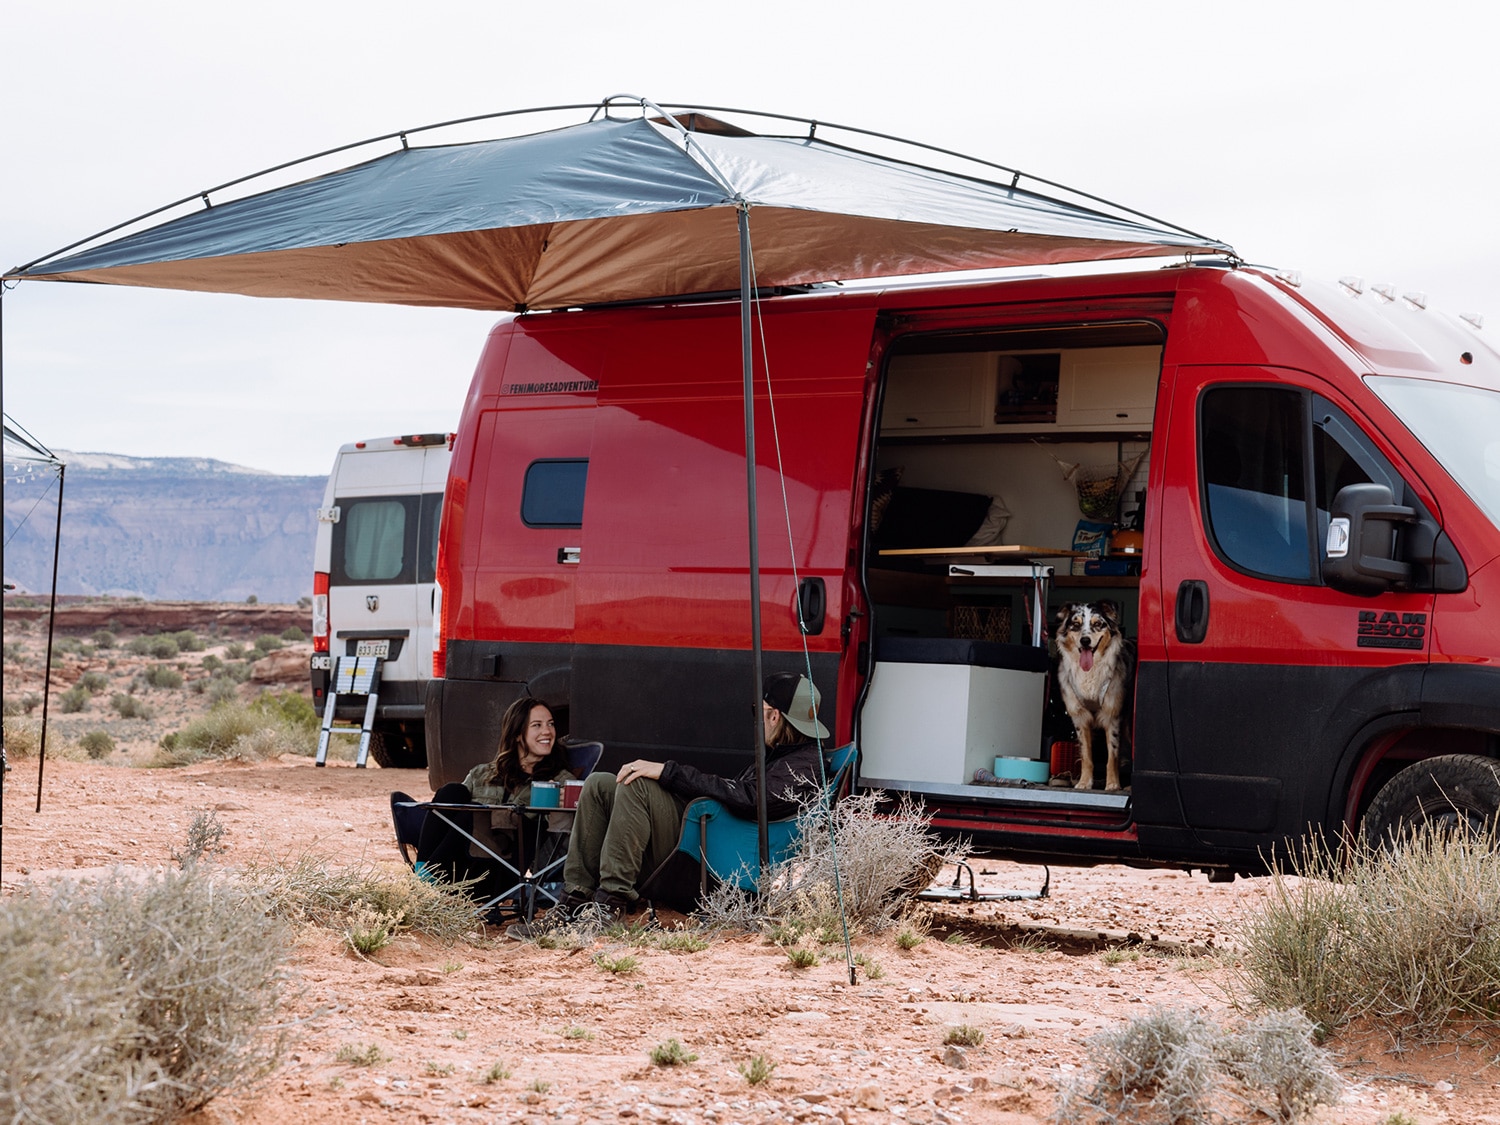 Van campers sitting beneath the MoonShade XL portable awning.